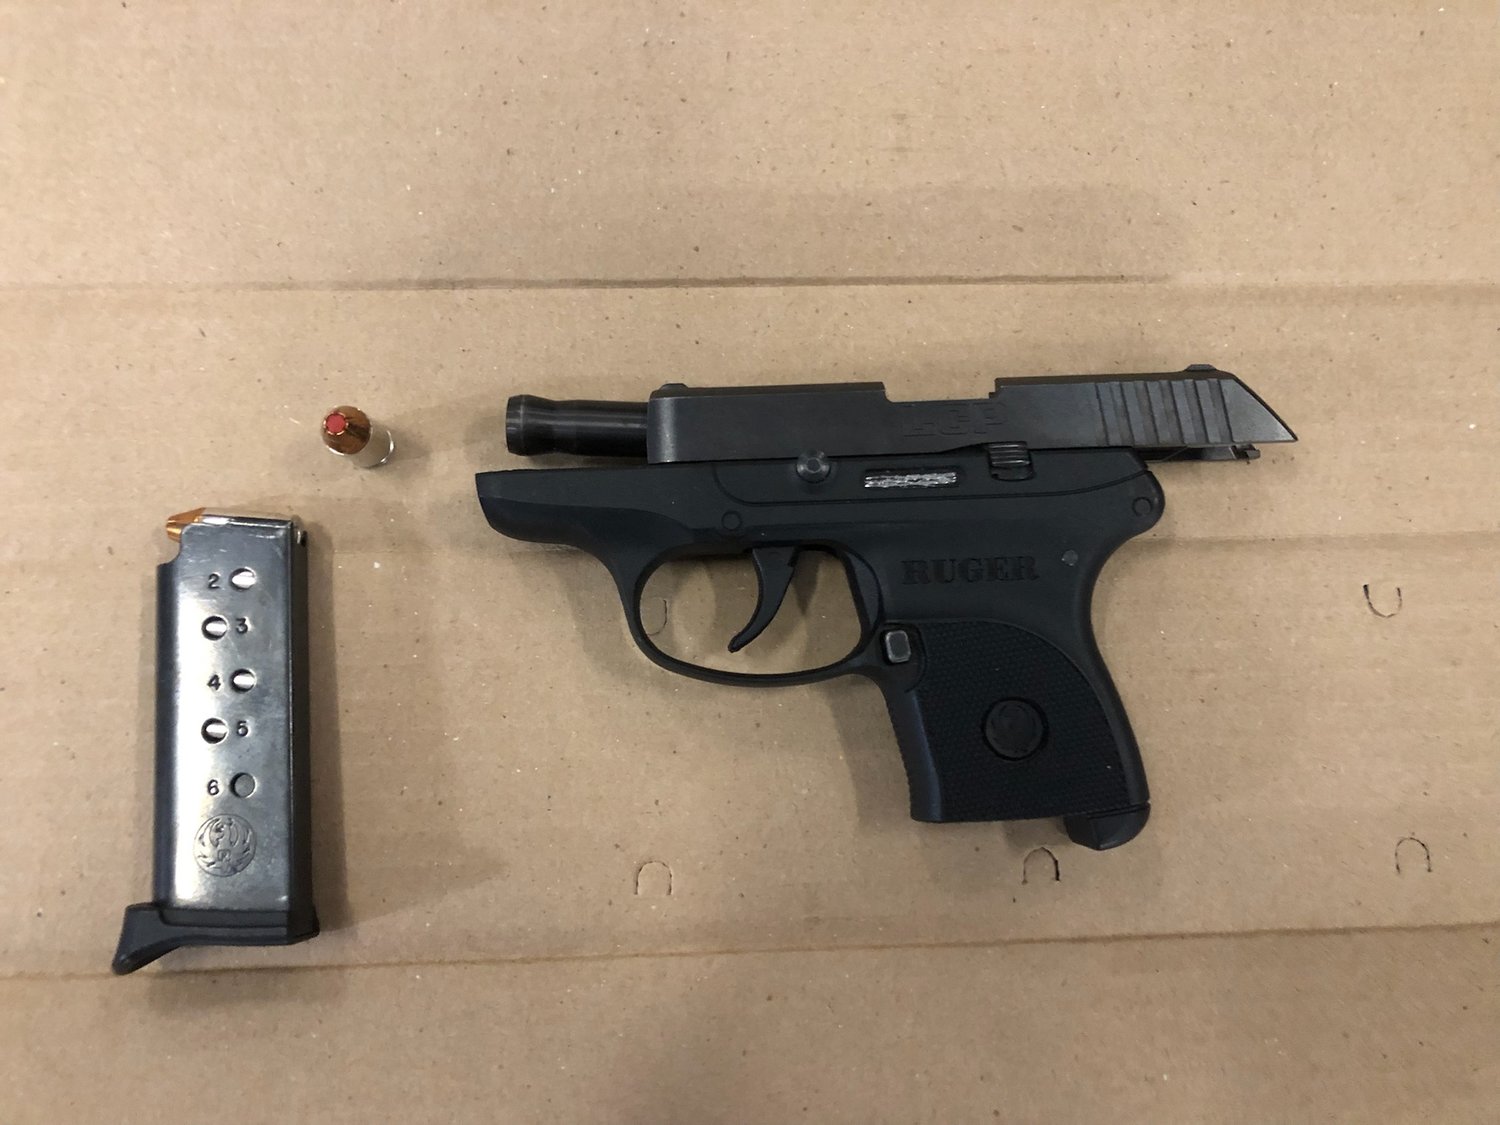 The loaded handgun that was allegedly found after a Nassau police car stop in Inwood on Dec. 3.